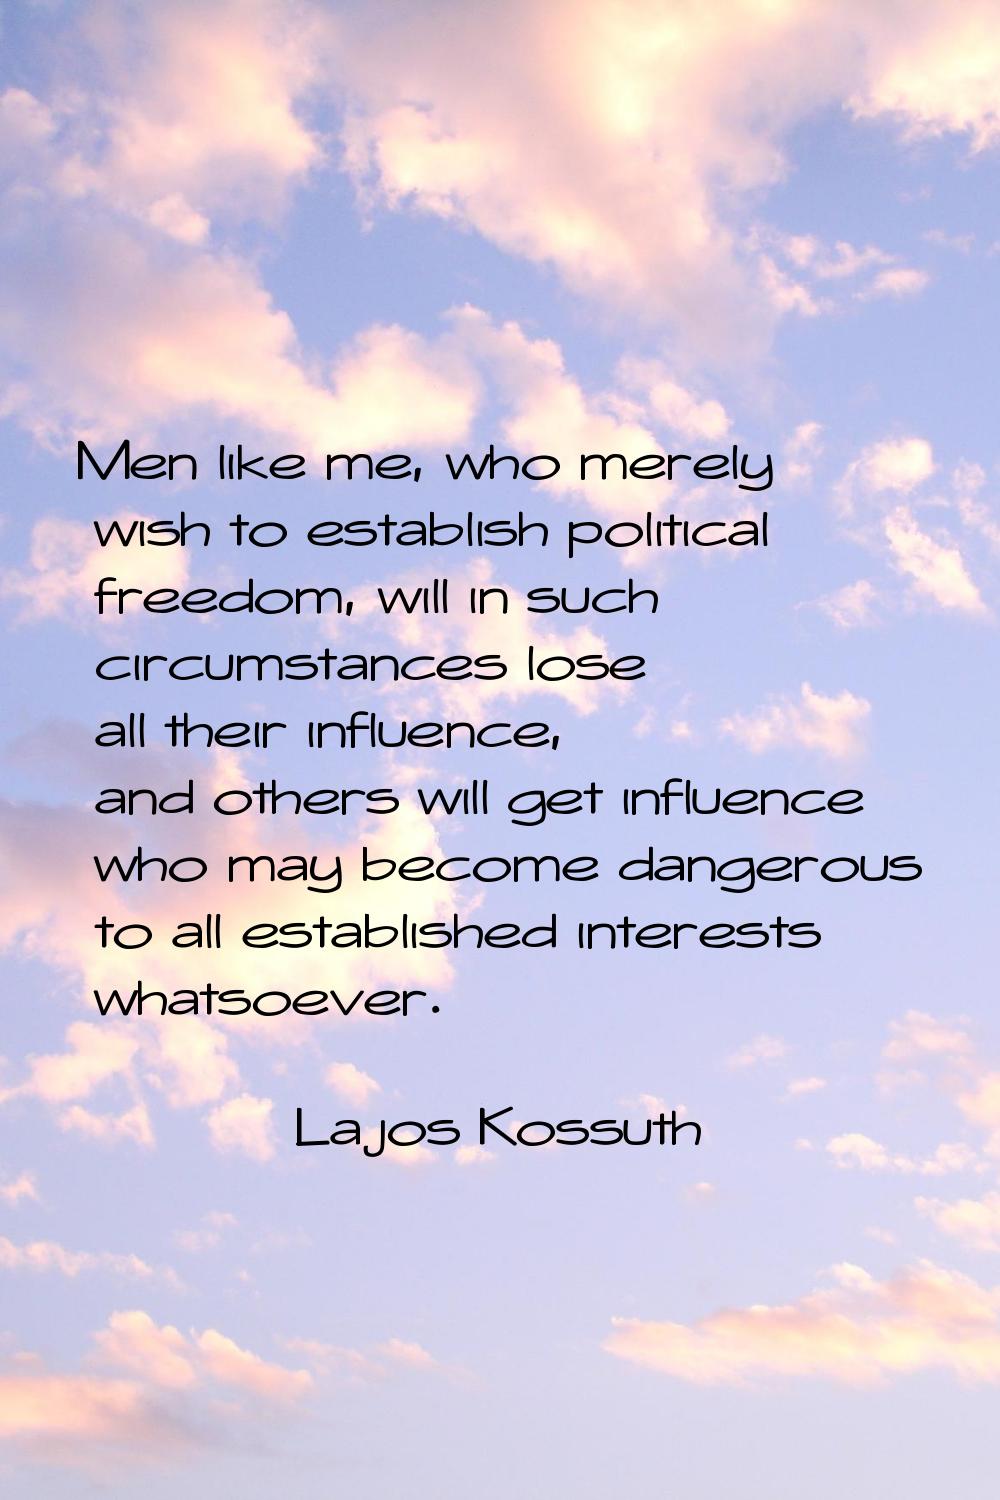 Men like me, who merely wish to establish political freedom, will in such circumstances lose all th